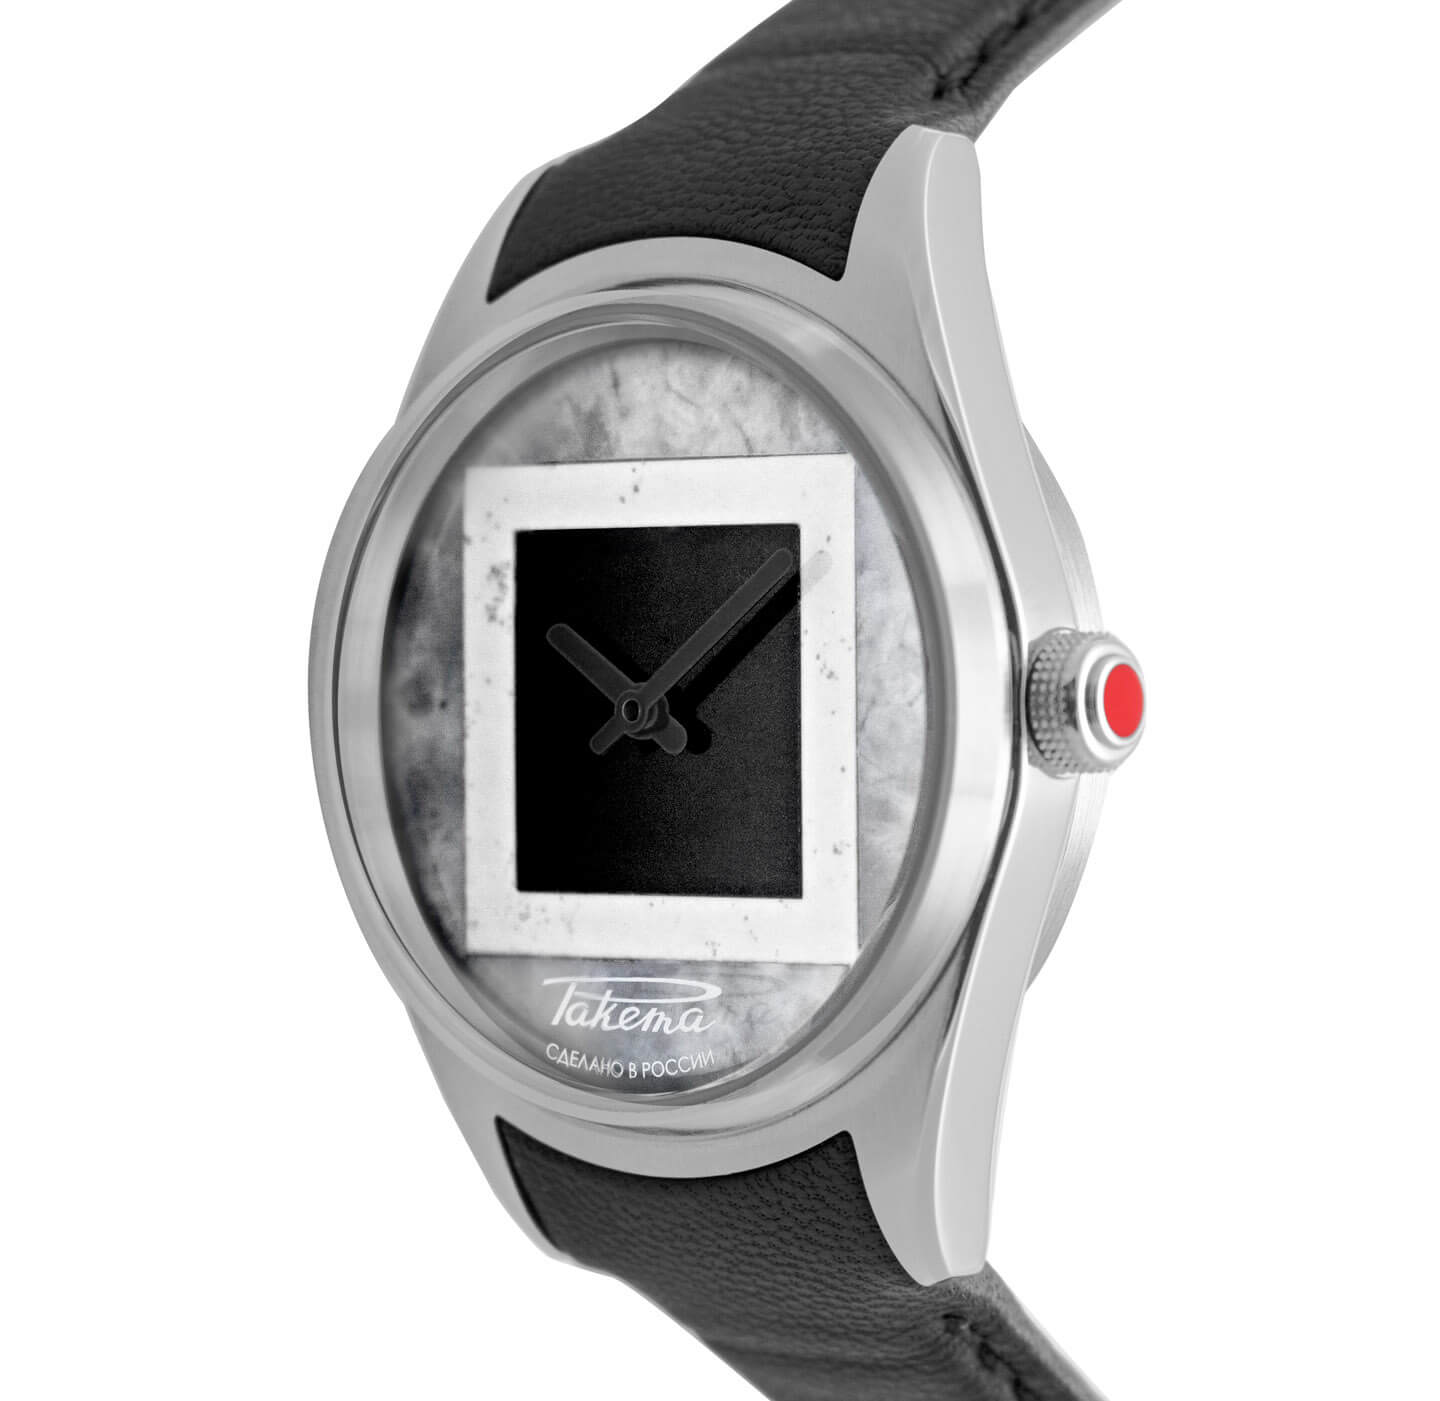 Raketa BIG ZERO Malevich Watch Produced In Collaboration With Russian National Art Museum